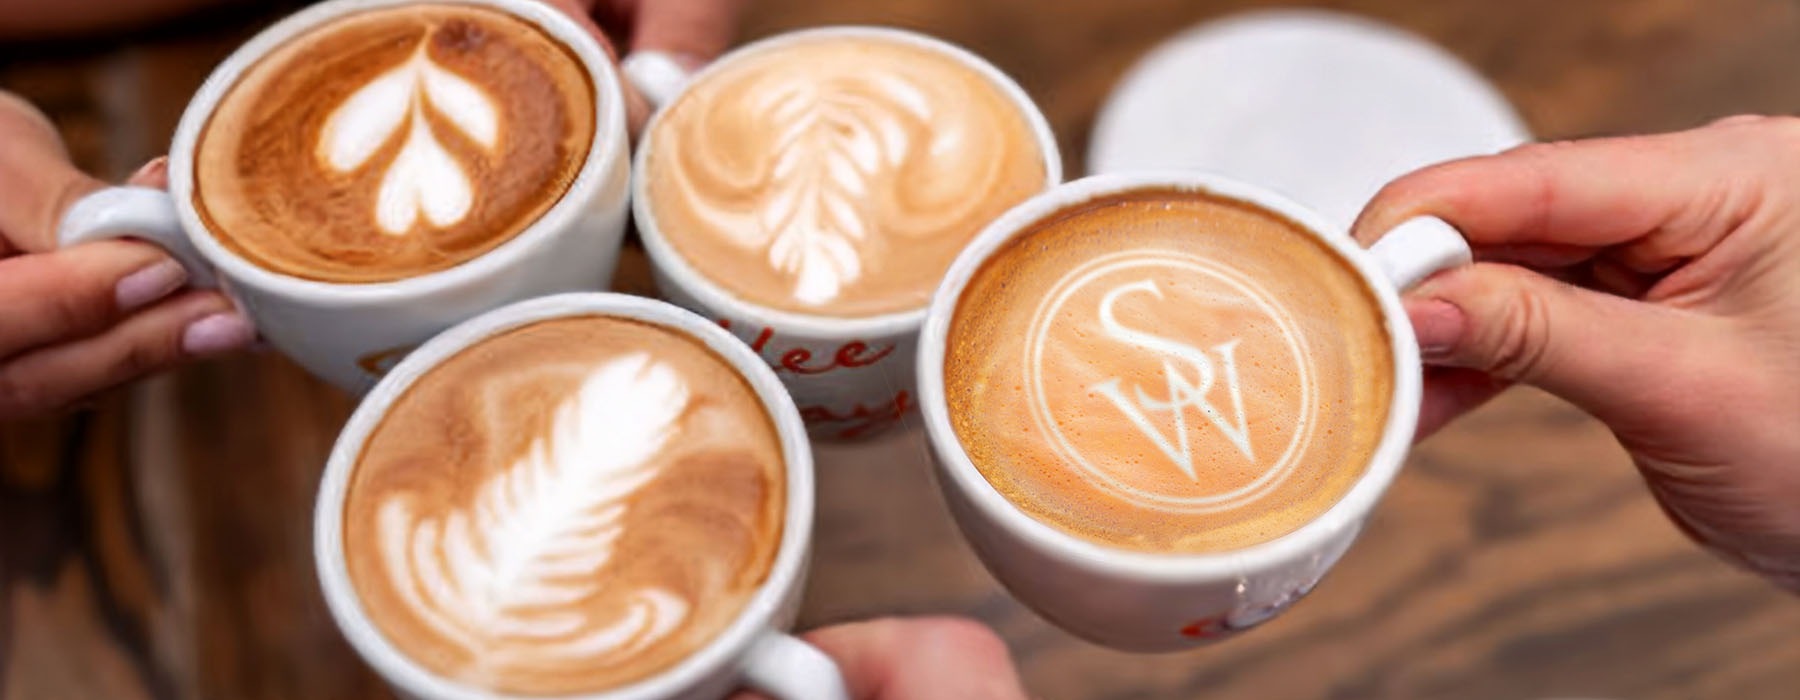 people hold cups of coffee together, showing off their foam designs